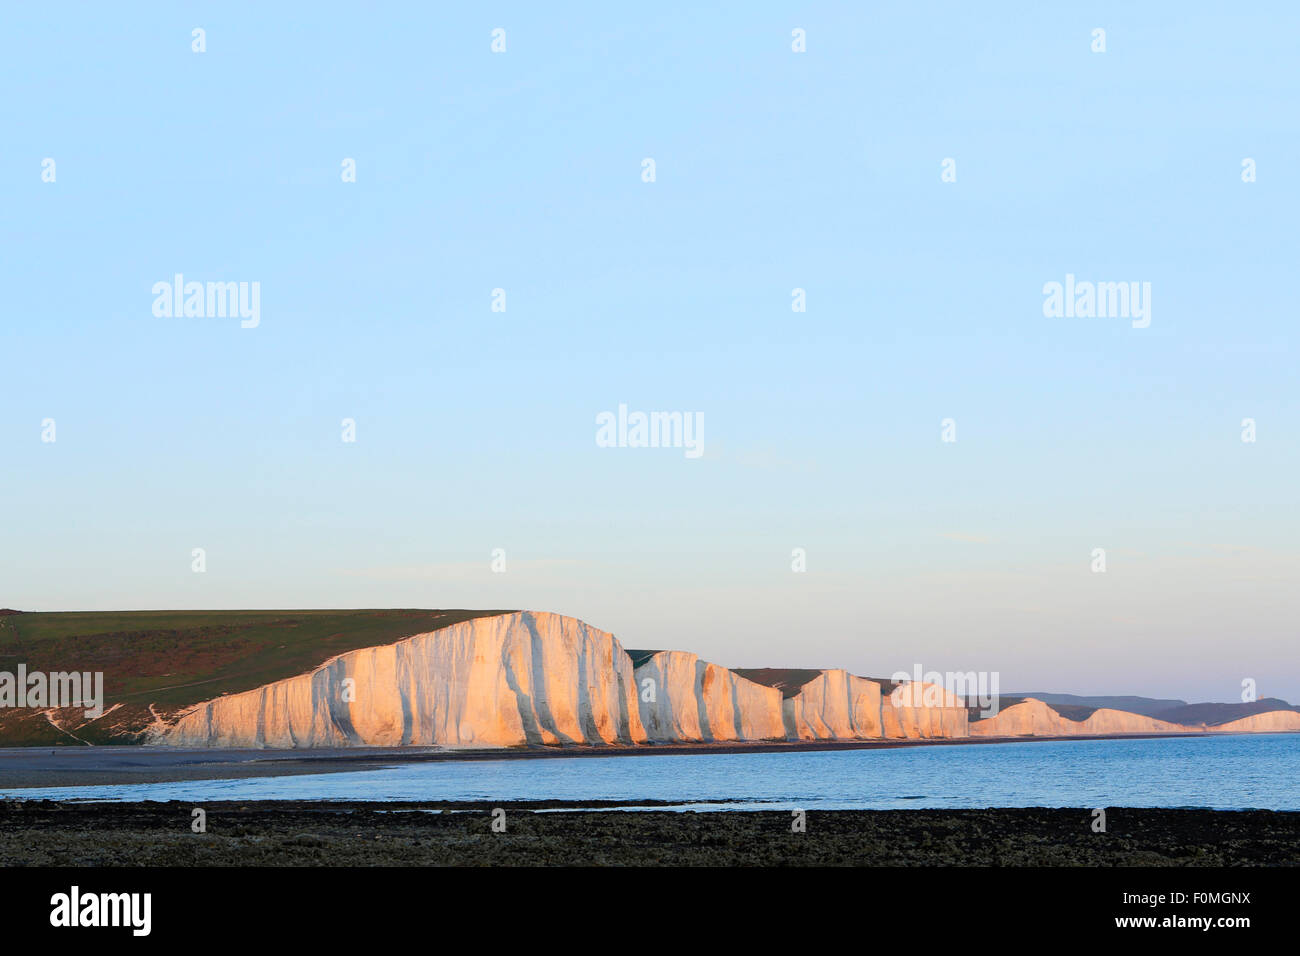 Pebble Beach a Cuckmere Haven & the Seven Sisters Cliffs on the South Downs Way, English Channel Sea, Eastbourne, East Sussex, Regno Unito Foto Stock